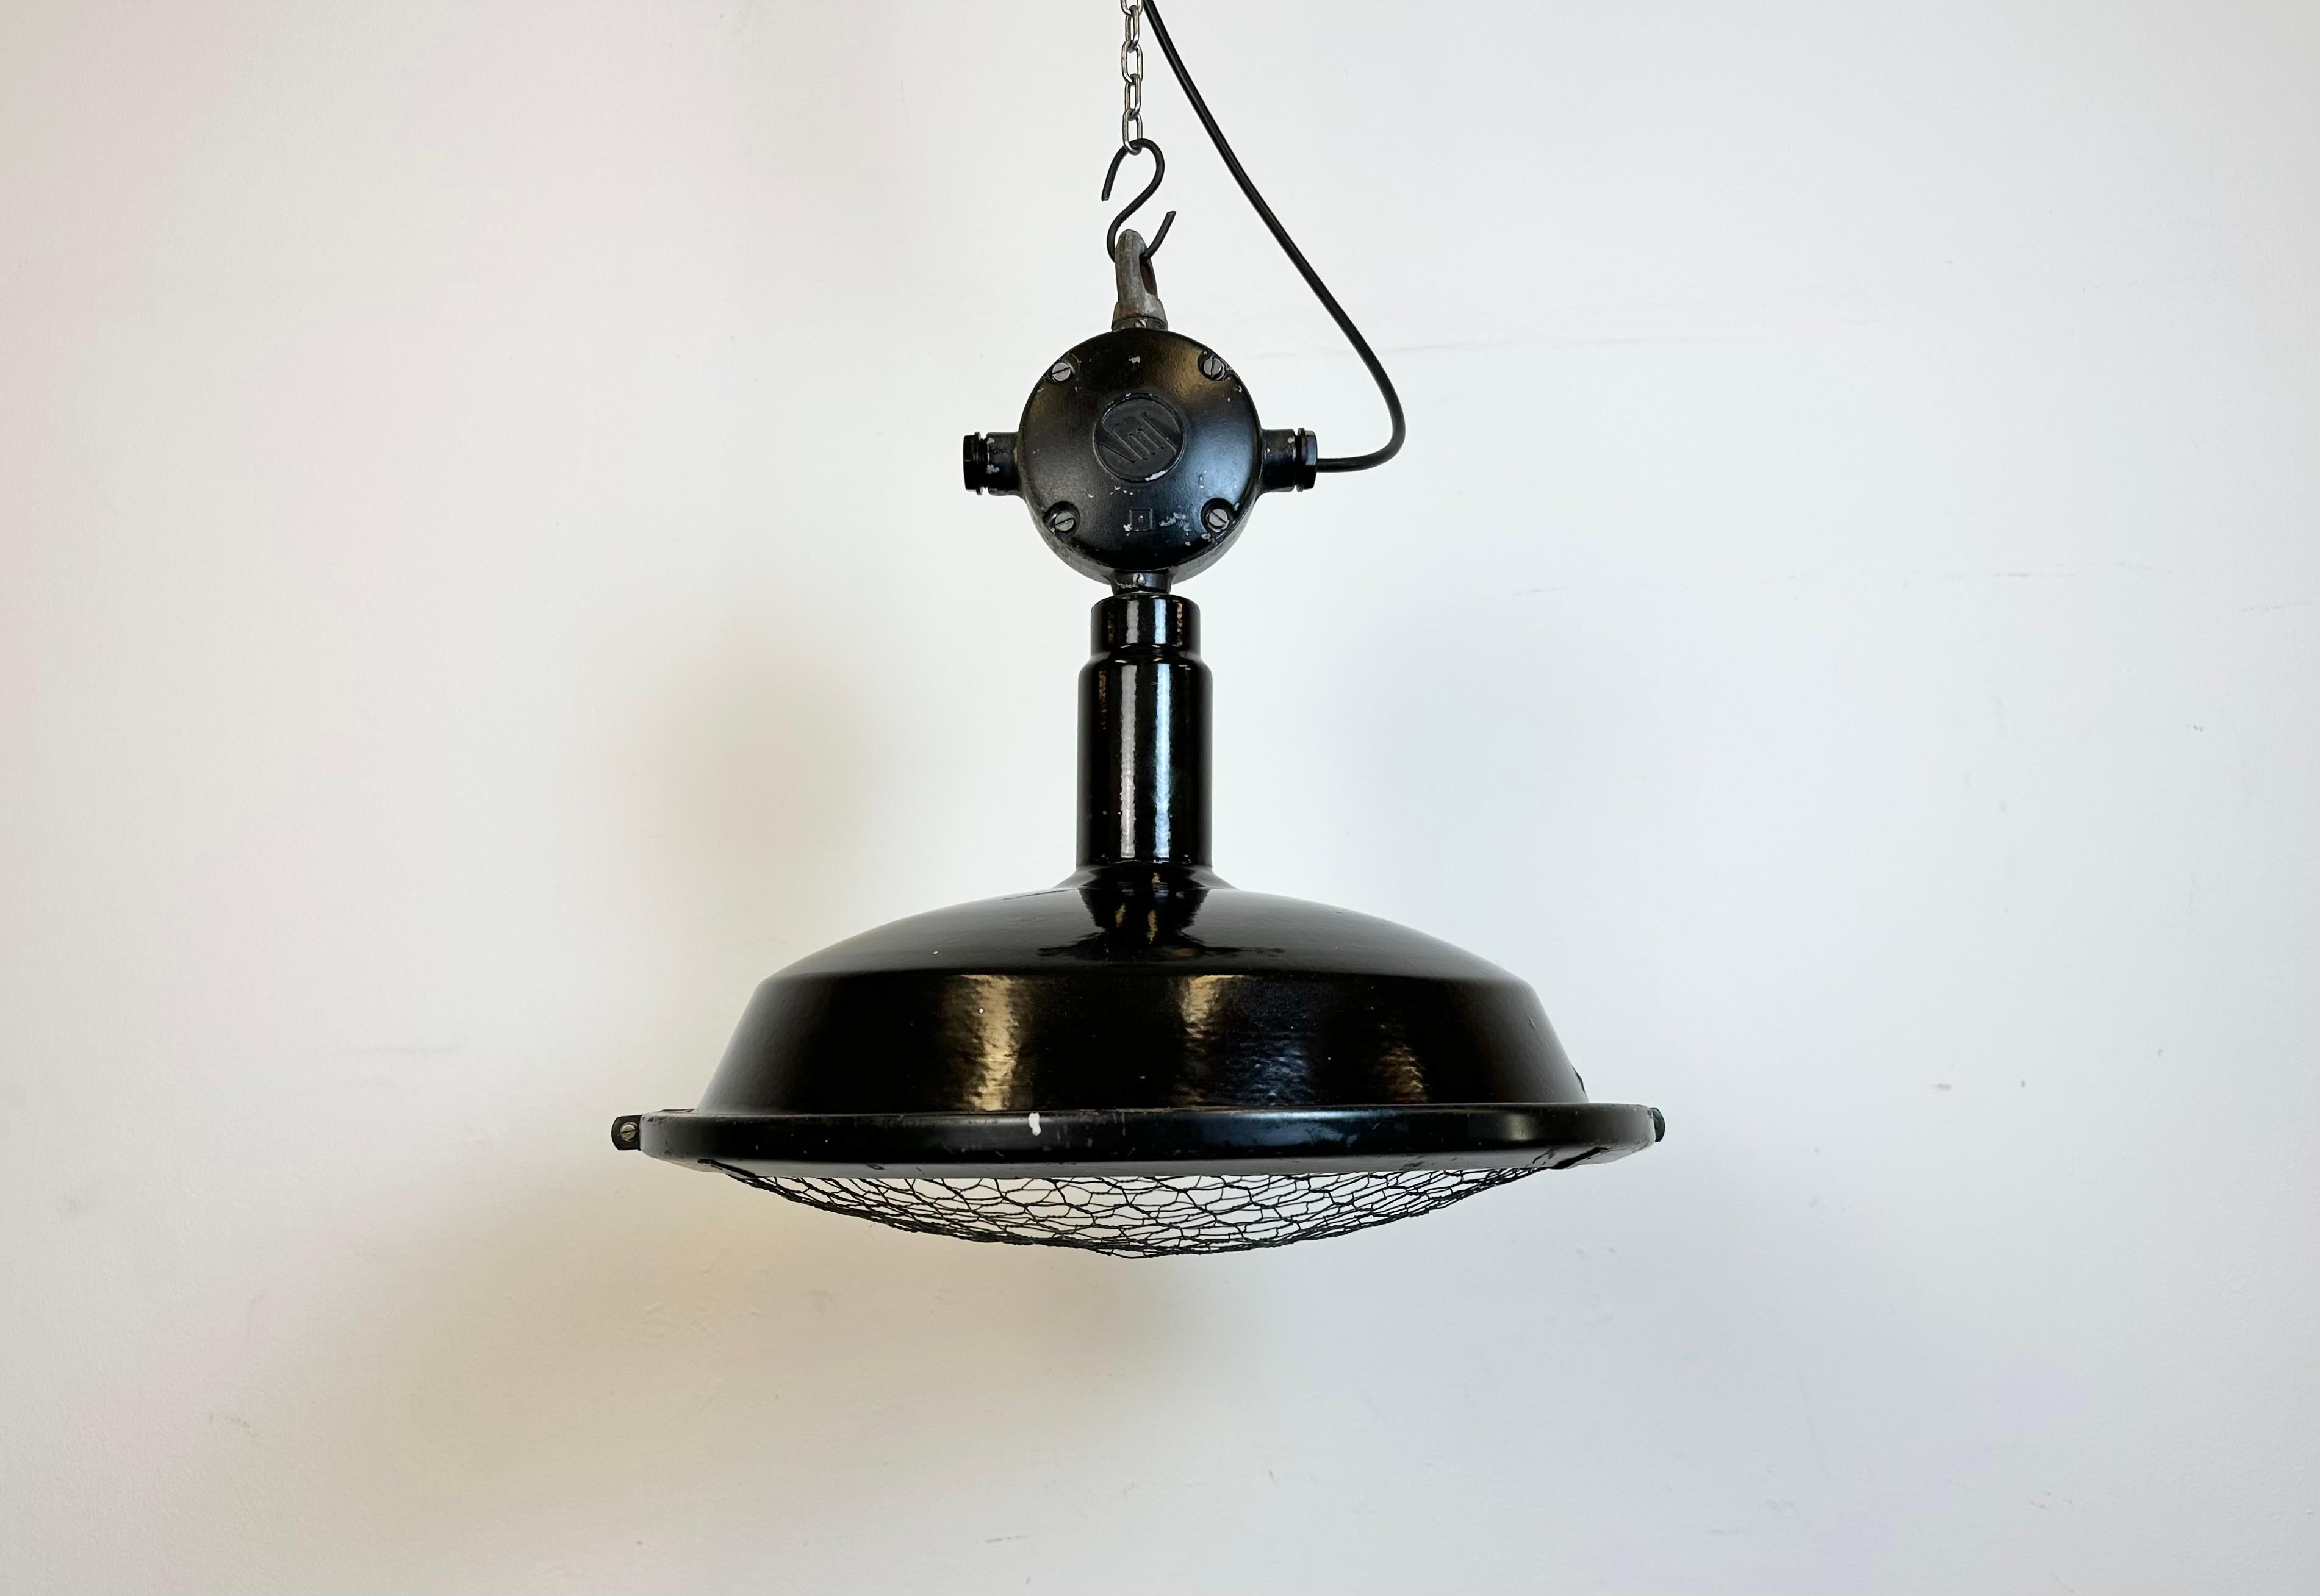 Industrial factory hanging lamp made by Elektrosvit in former Czechoslovakia during the 1950s. It features a black enamel shade with white enamel interior, a cast aluminium top box and an iron protective grid. New porcelain socket requires standard